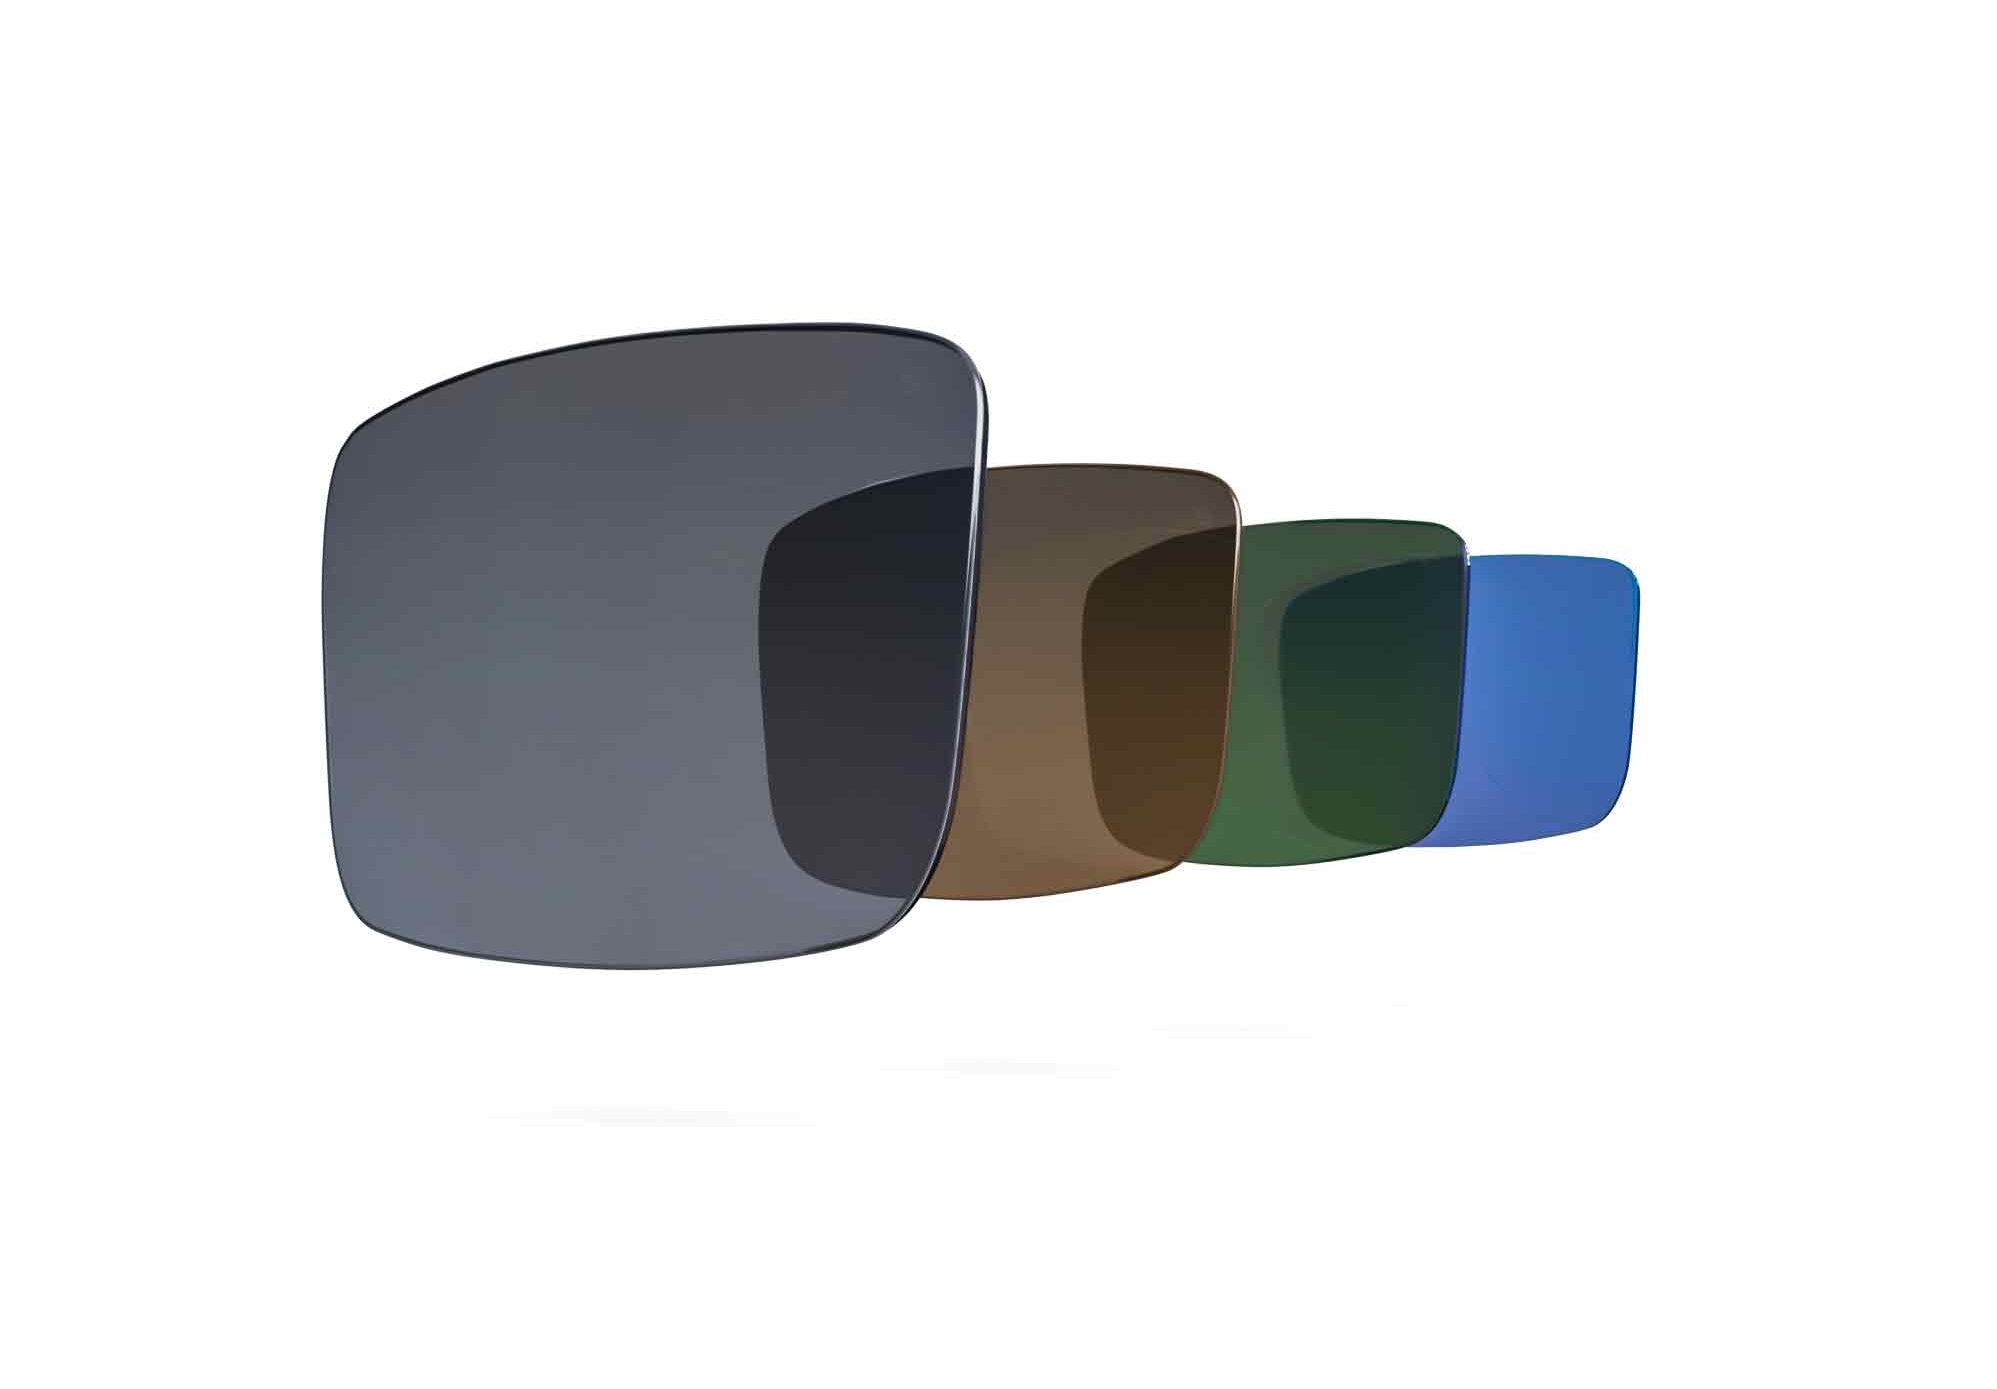 Illustration showing three different colour choices for ZEISS photochromic lenses